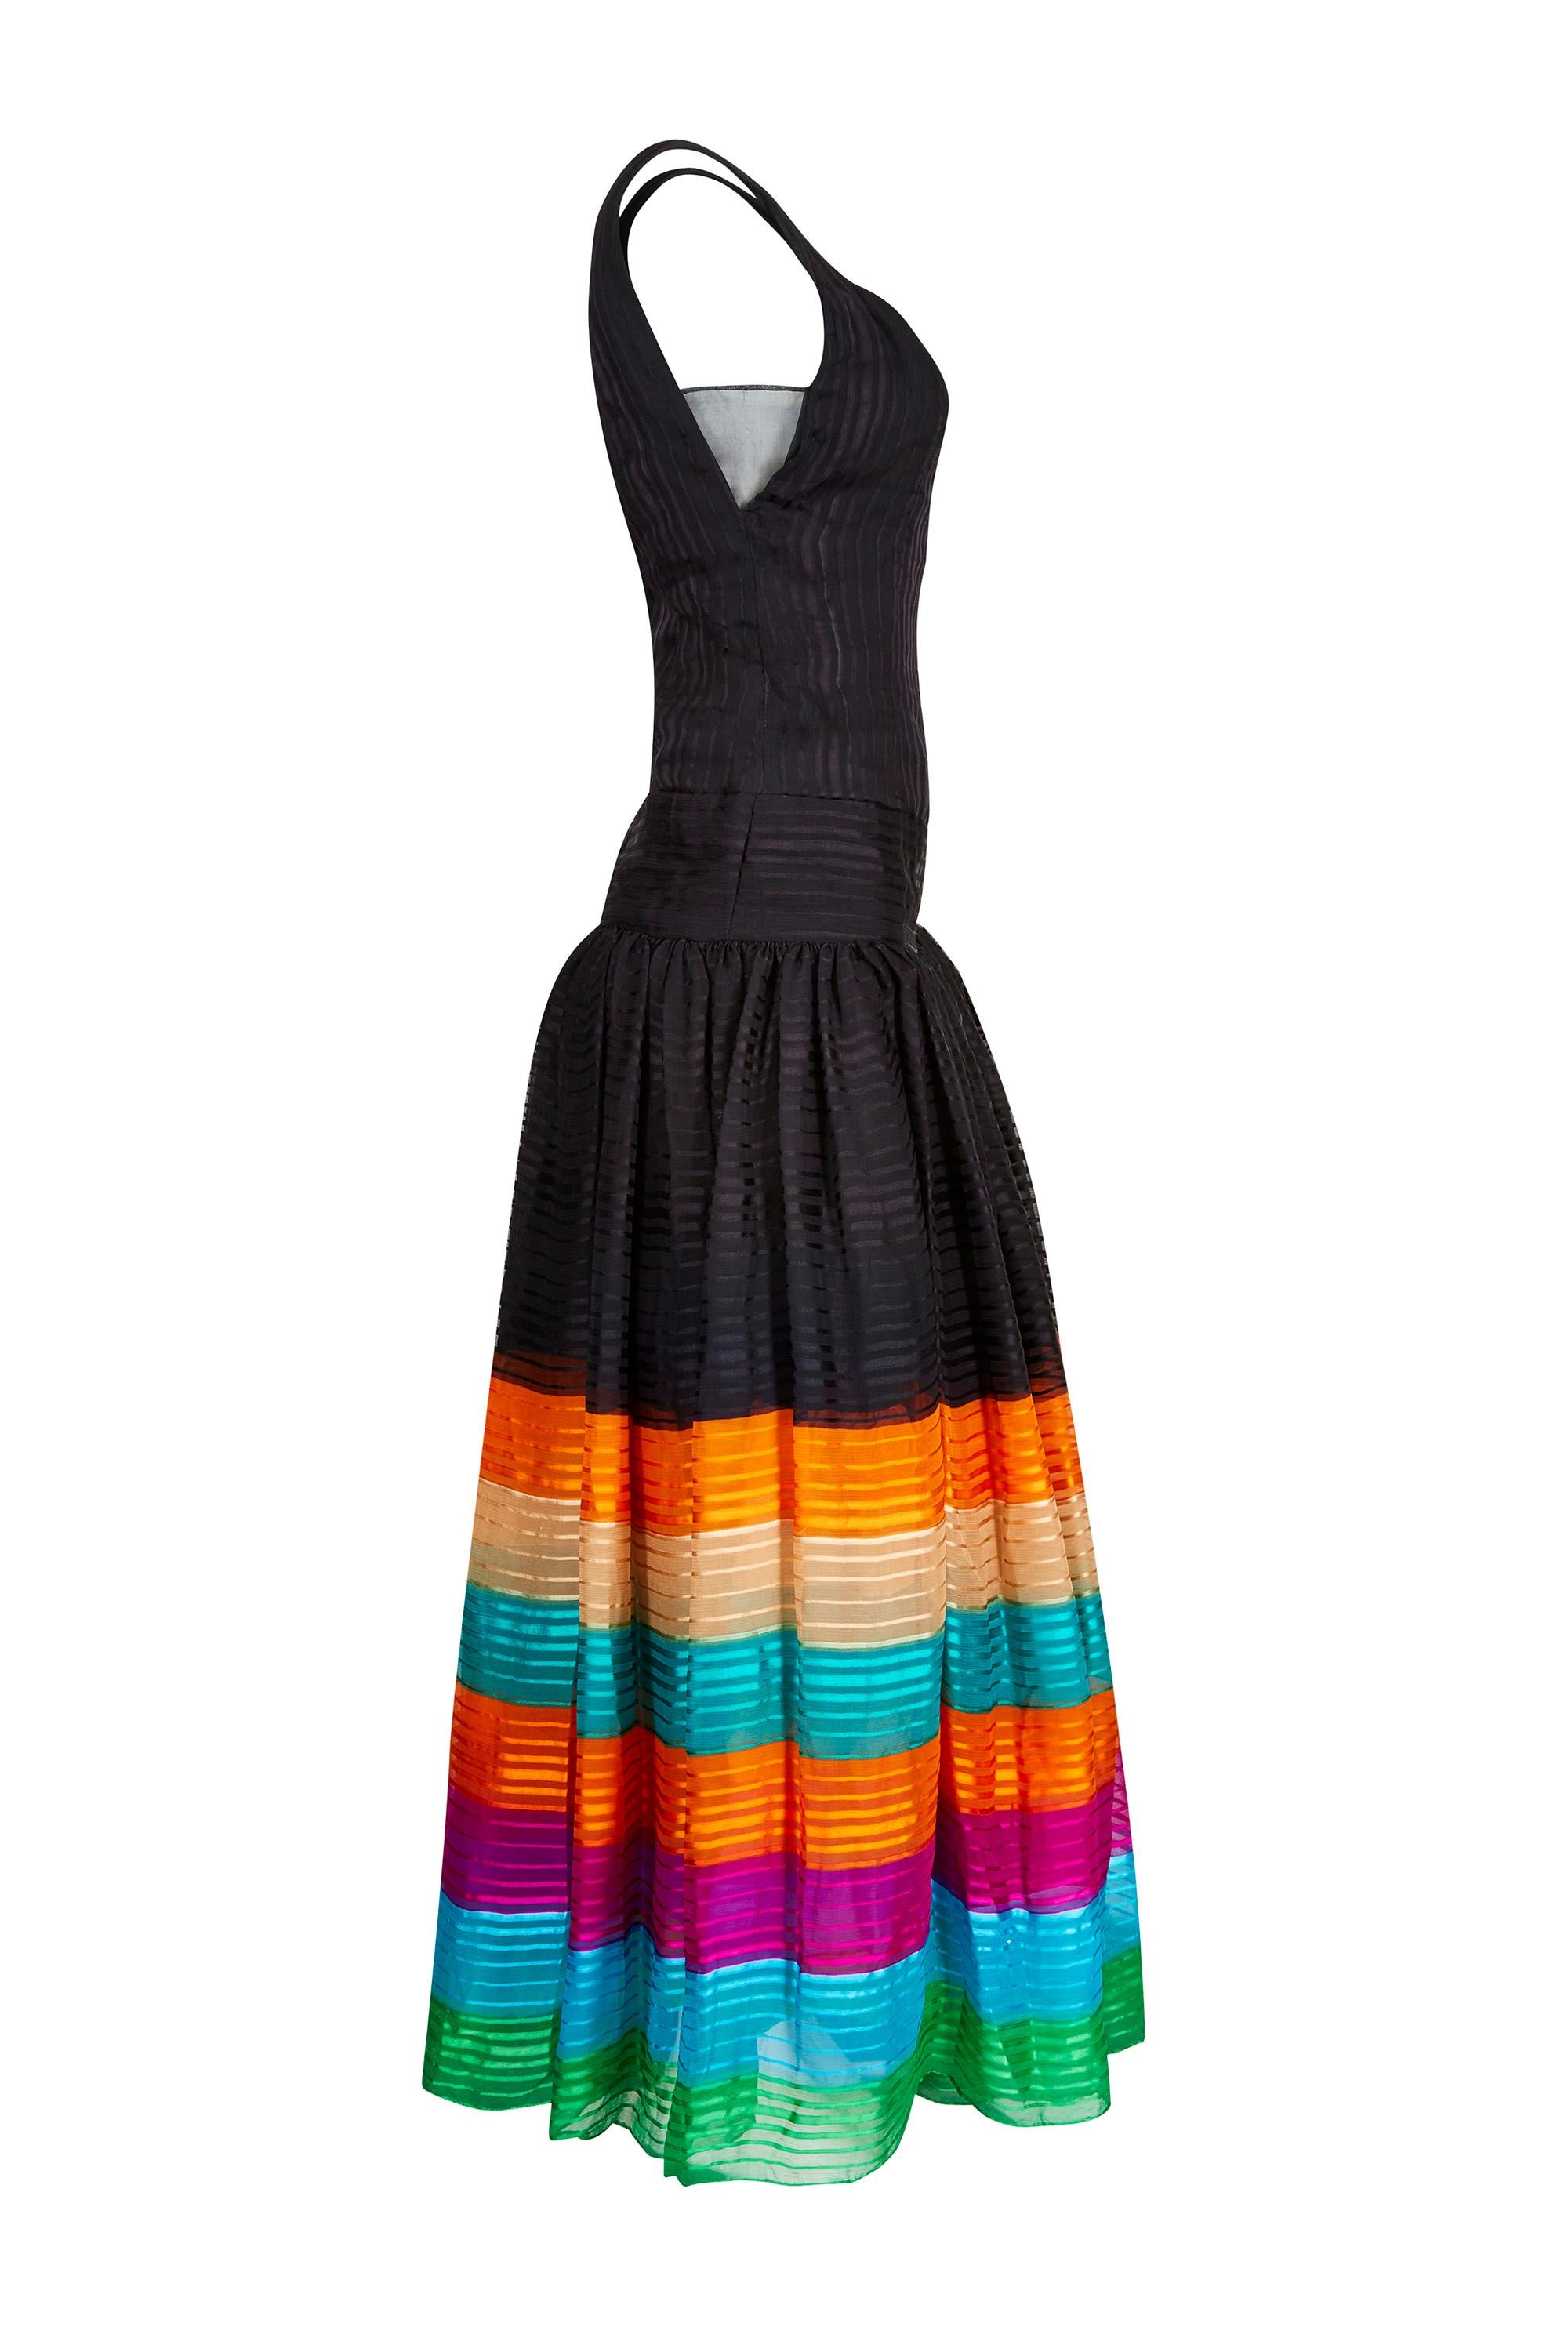 This vivacious 1970s pure silk chiffon haute couture dress with rainbow hemline is of excellent quality and in superb vintage condition. Although unlabelled, we are able to discern that it is American in origin and is likely to be by one of the most